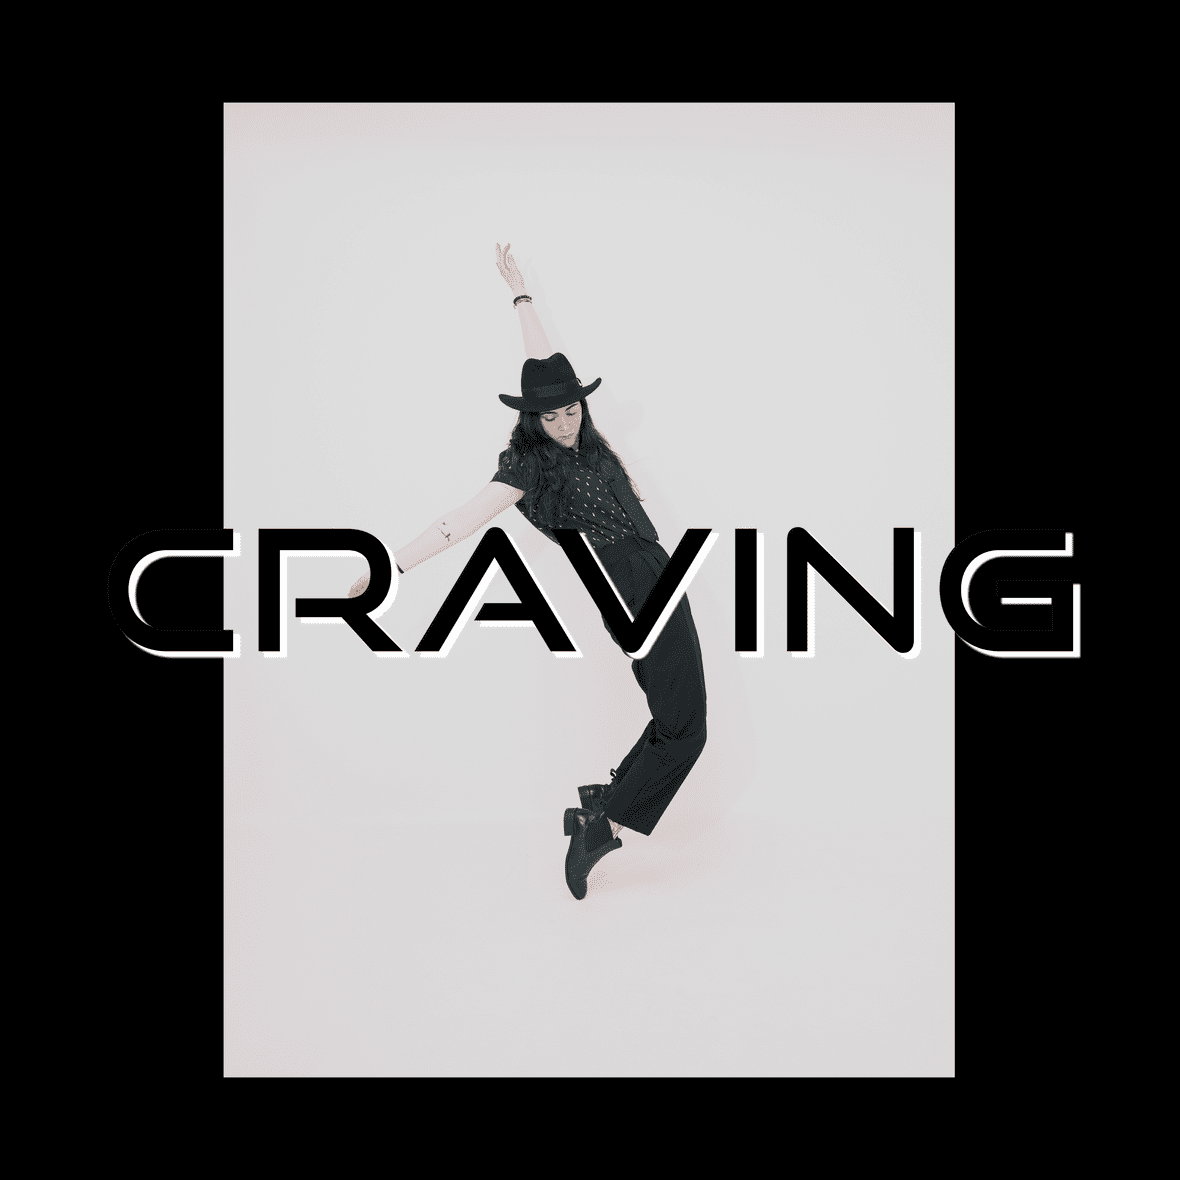 Featured art for "Craving" single by EVVAN